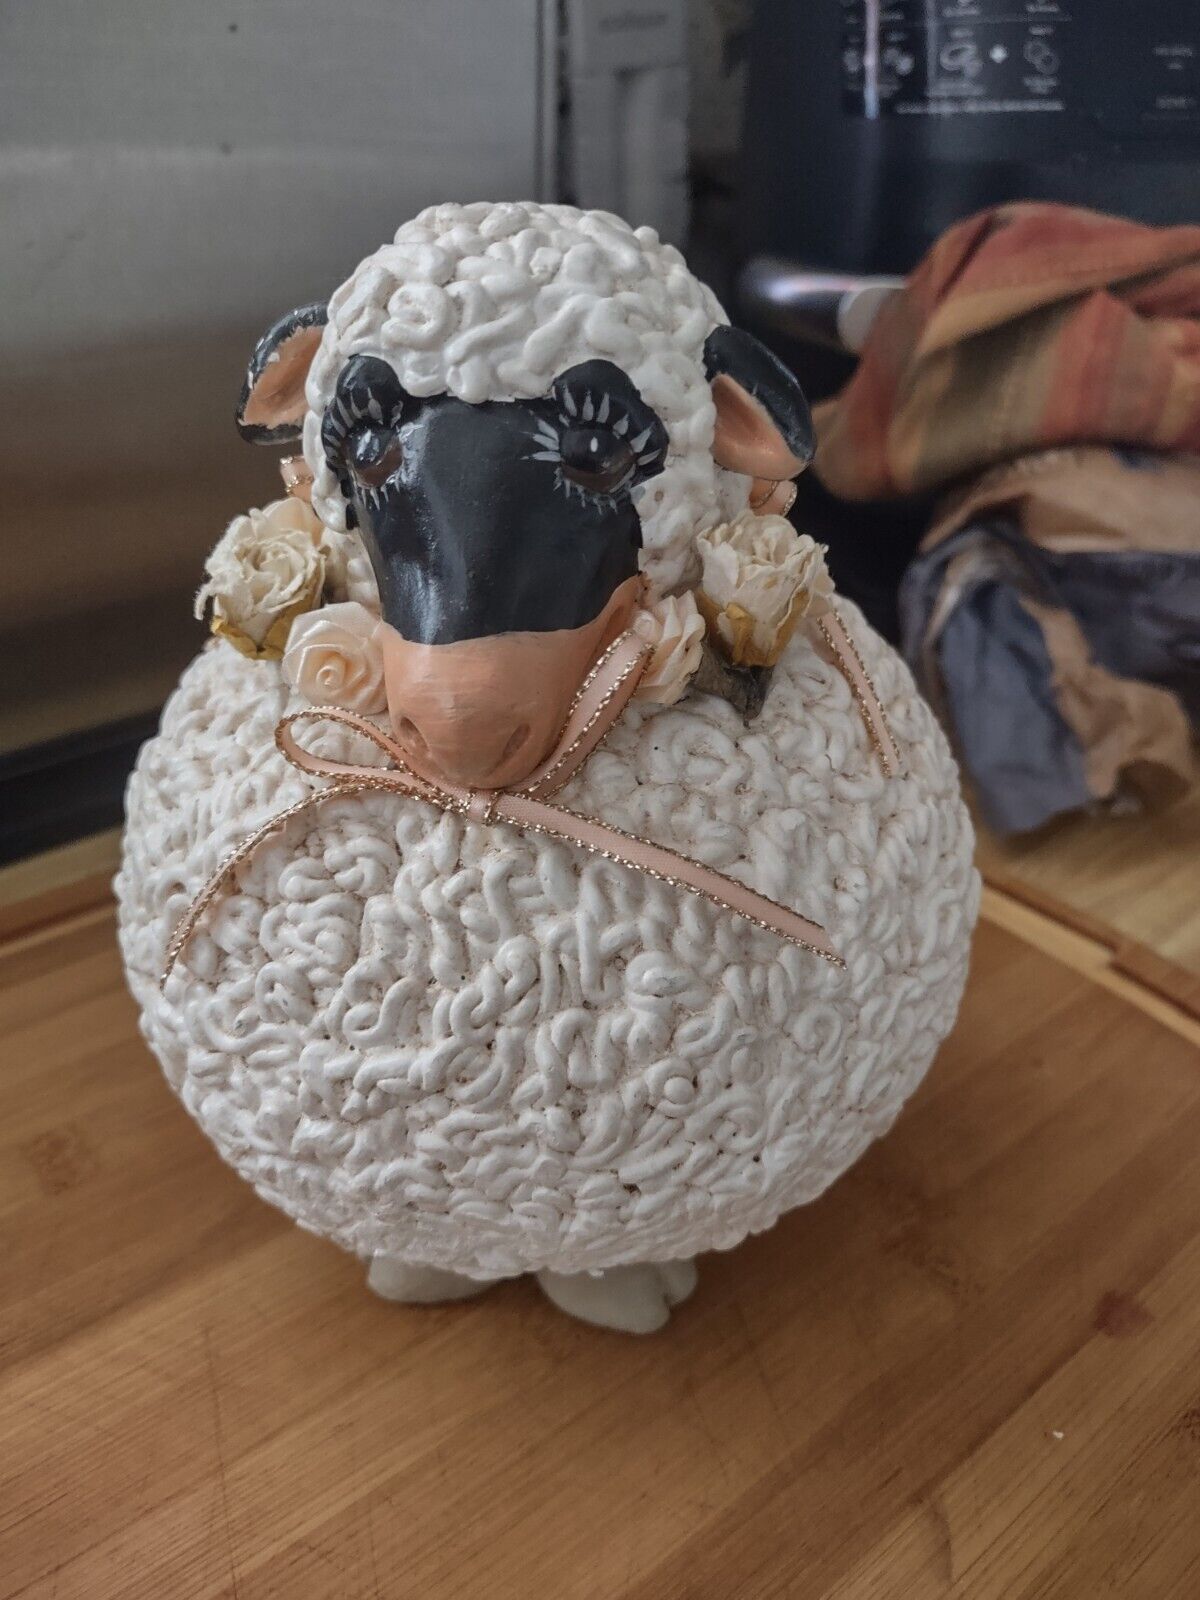 Adorable Ceramic Sheep Fluffed And Ready To Go. Fun Gift